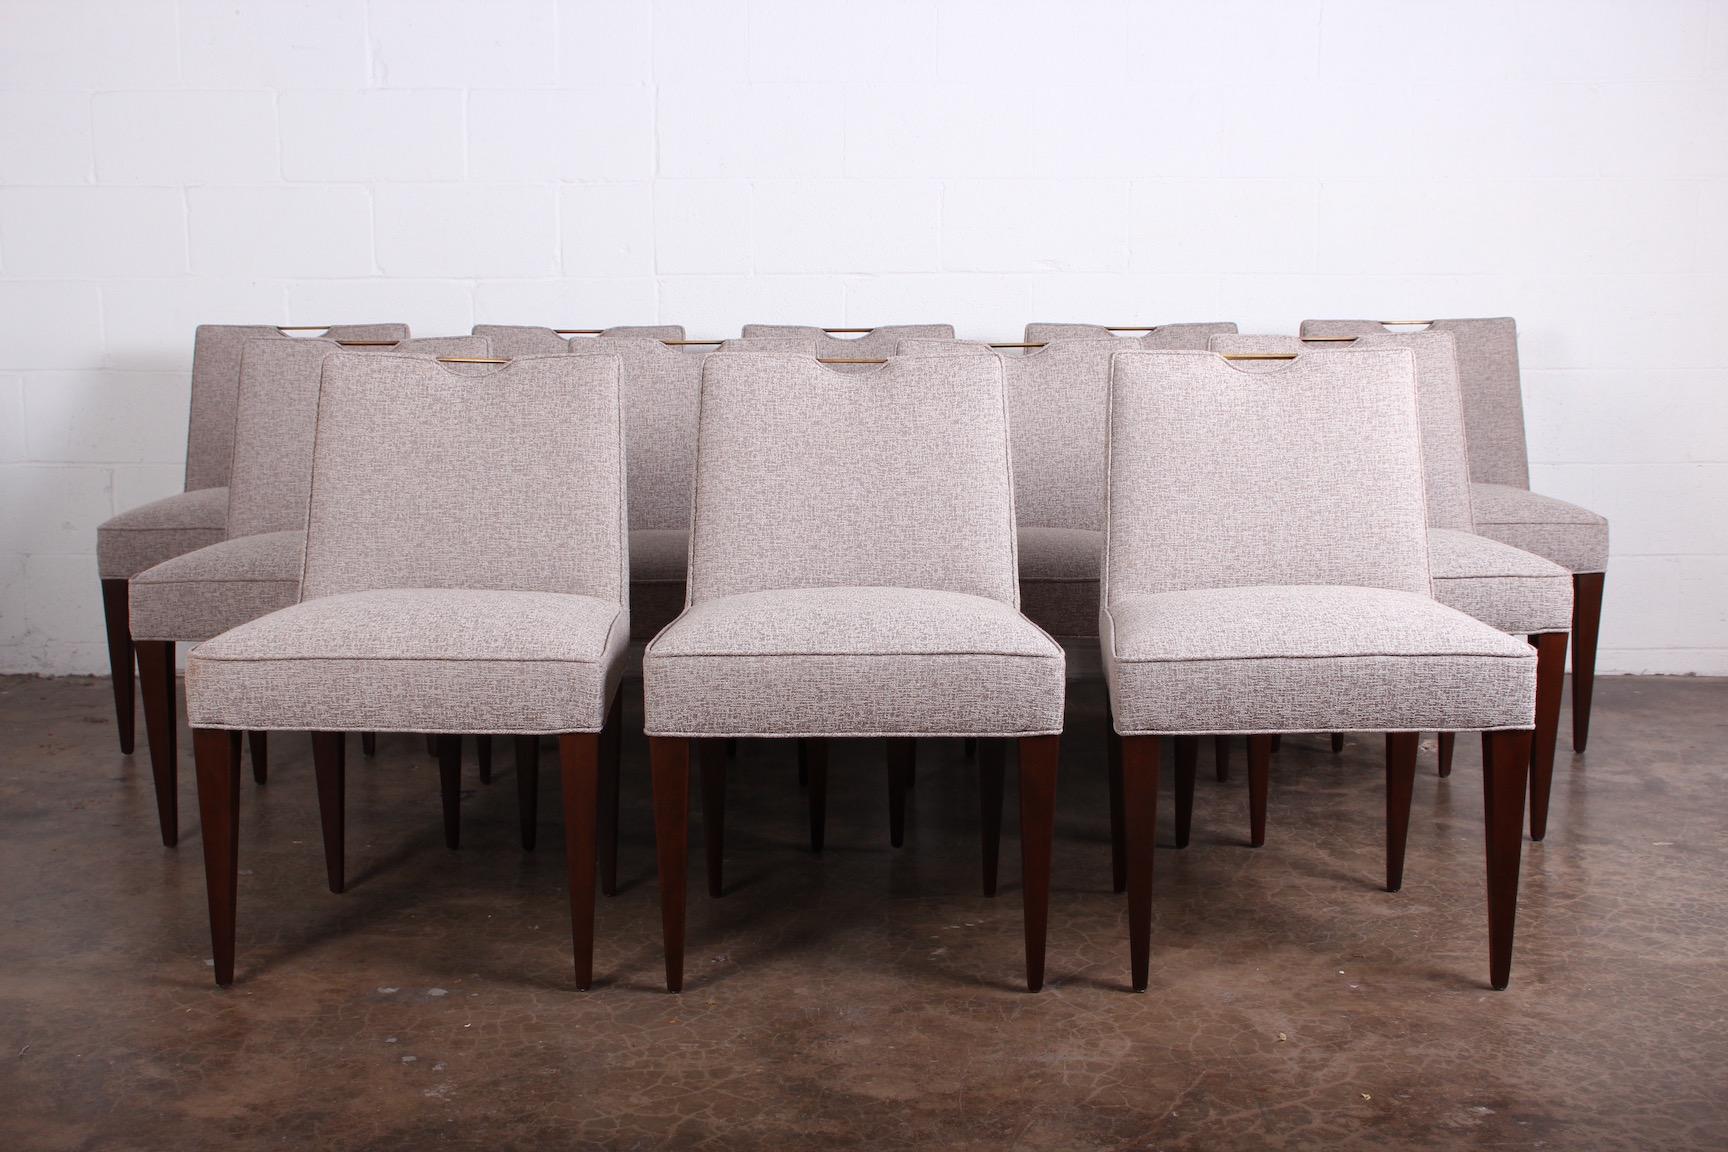 Twelve Dining Chairs by Edward Wormley for Dunbar 4